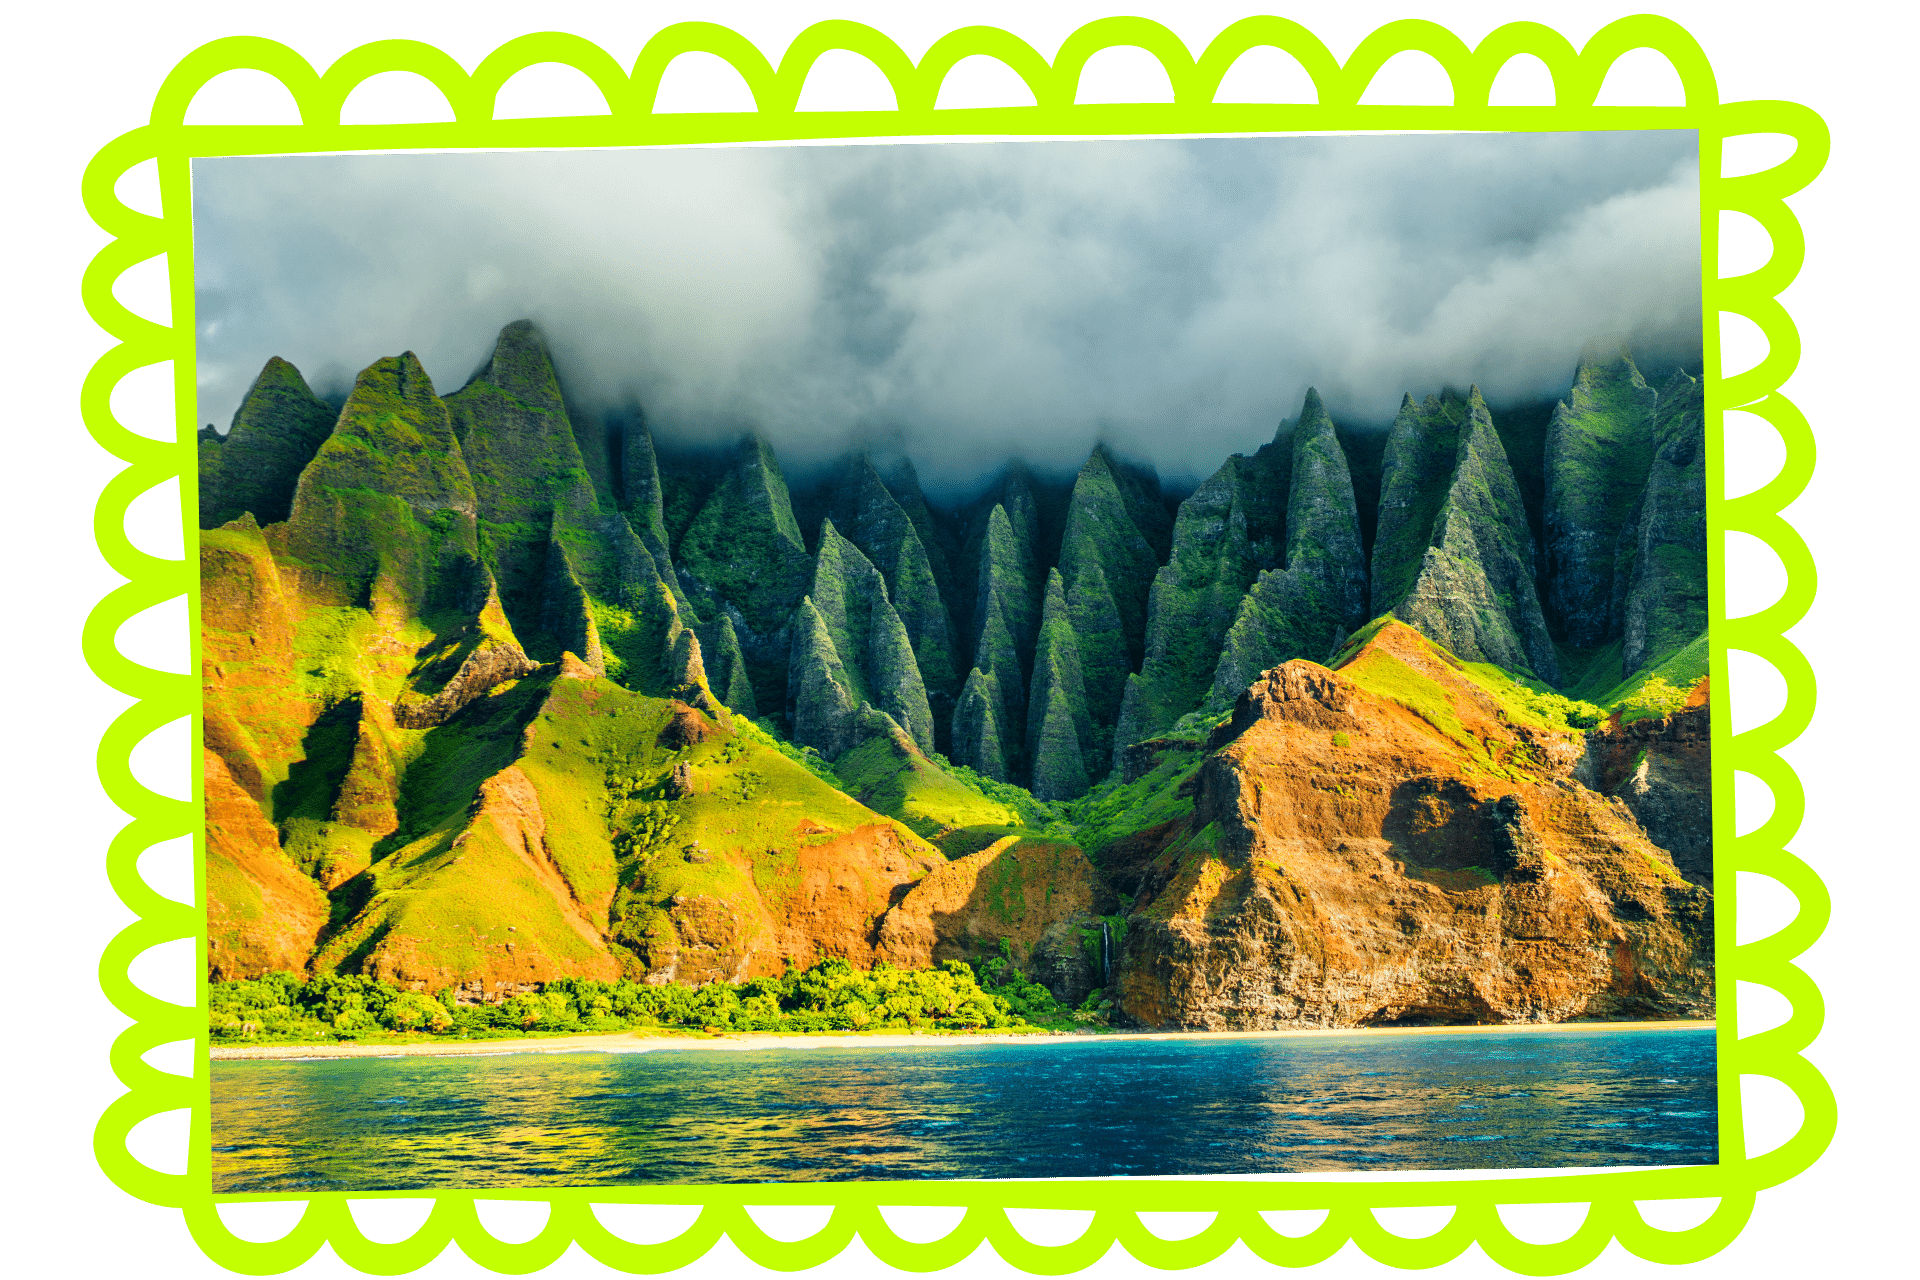 Jurassic Park, partly filmed on the Hawaiian Island of Kauai, is one of ten films that will inspire you to visit the USA